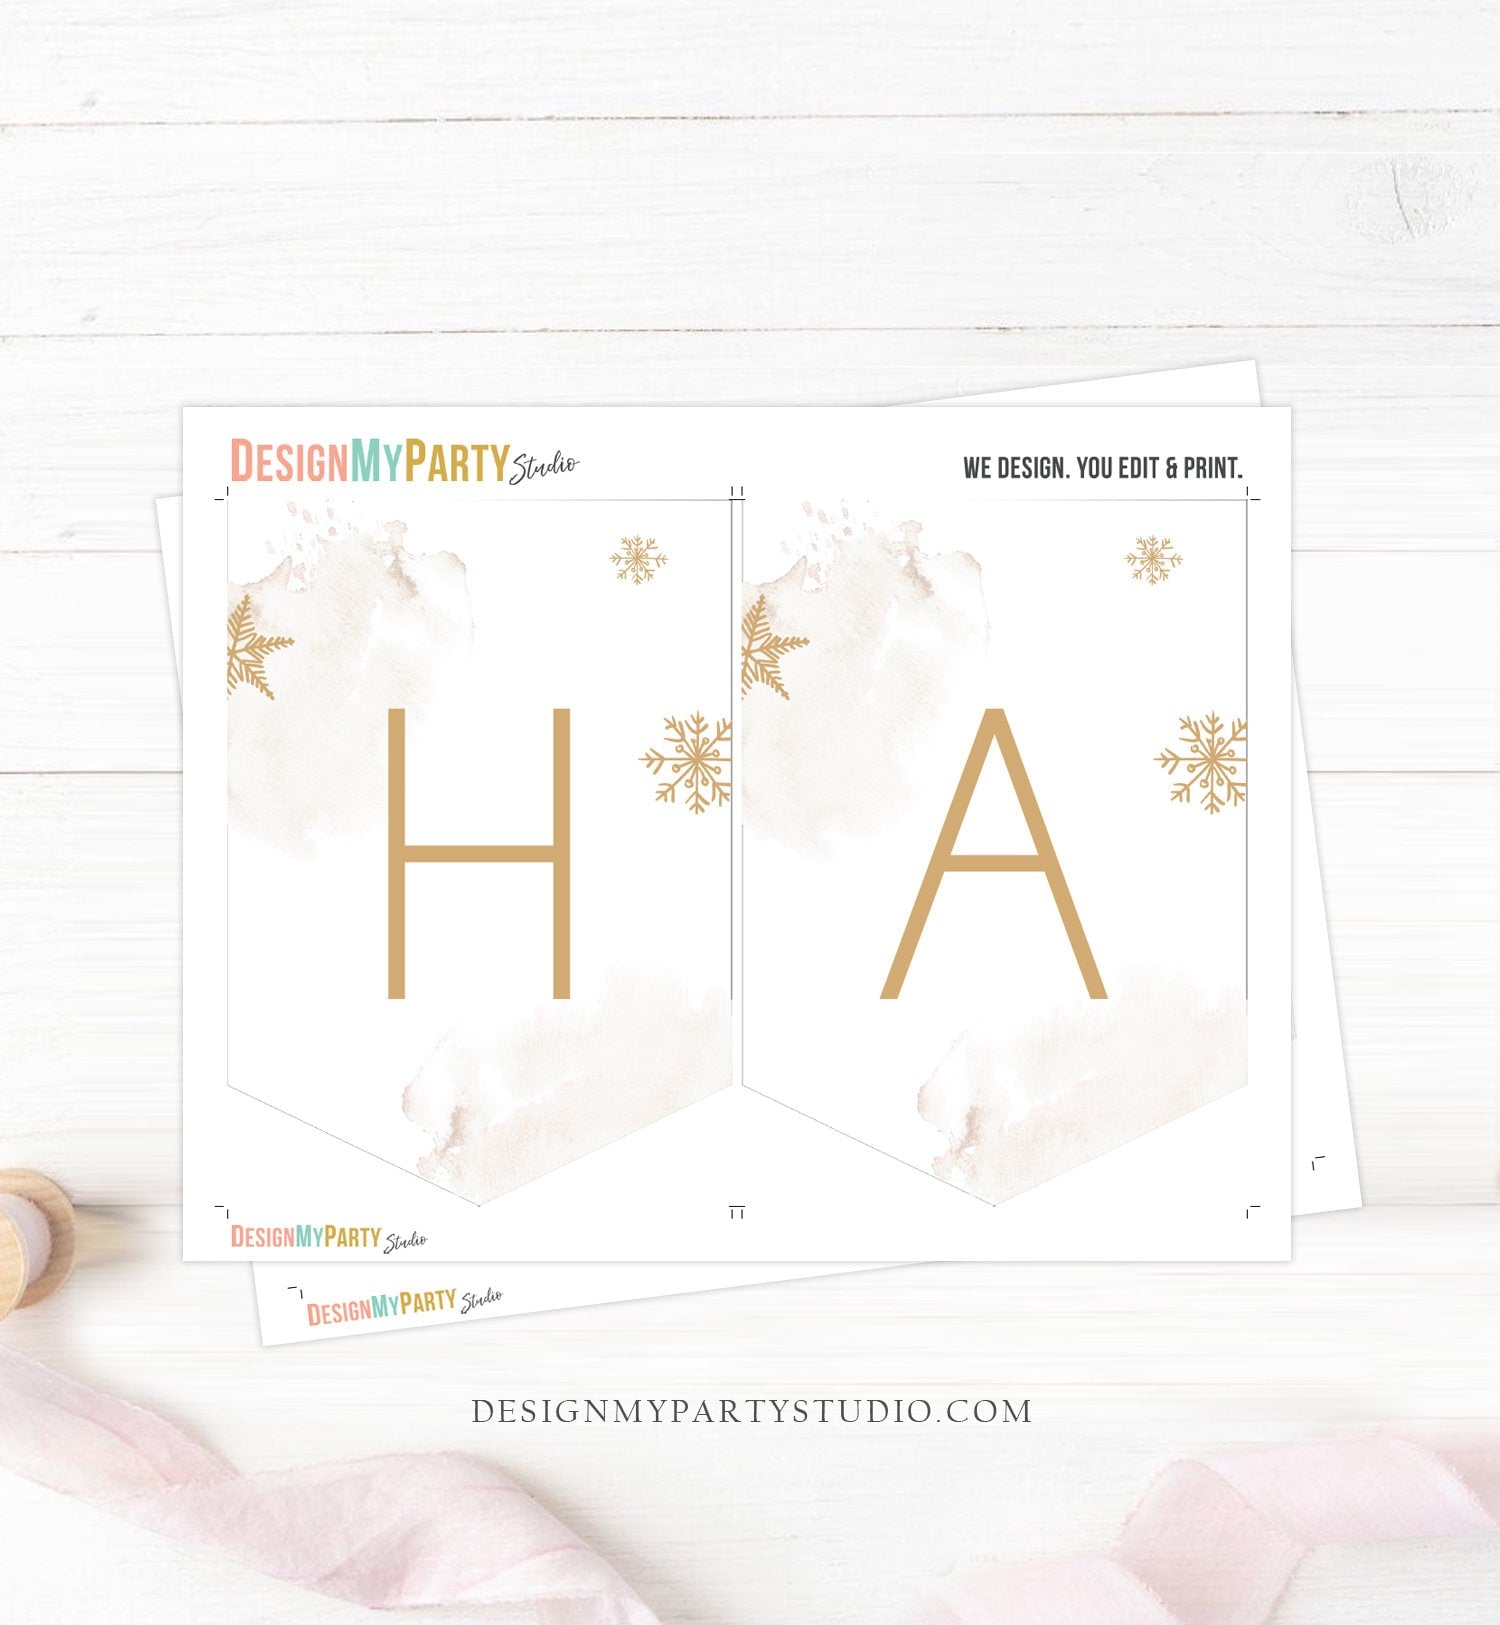 Happy Birthday Banner Winter Tree Birthday Neutral Gold Red Winter Onederland Winter Magical Christmas Download PRINTABLE DIGITAL DIY 0363